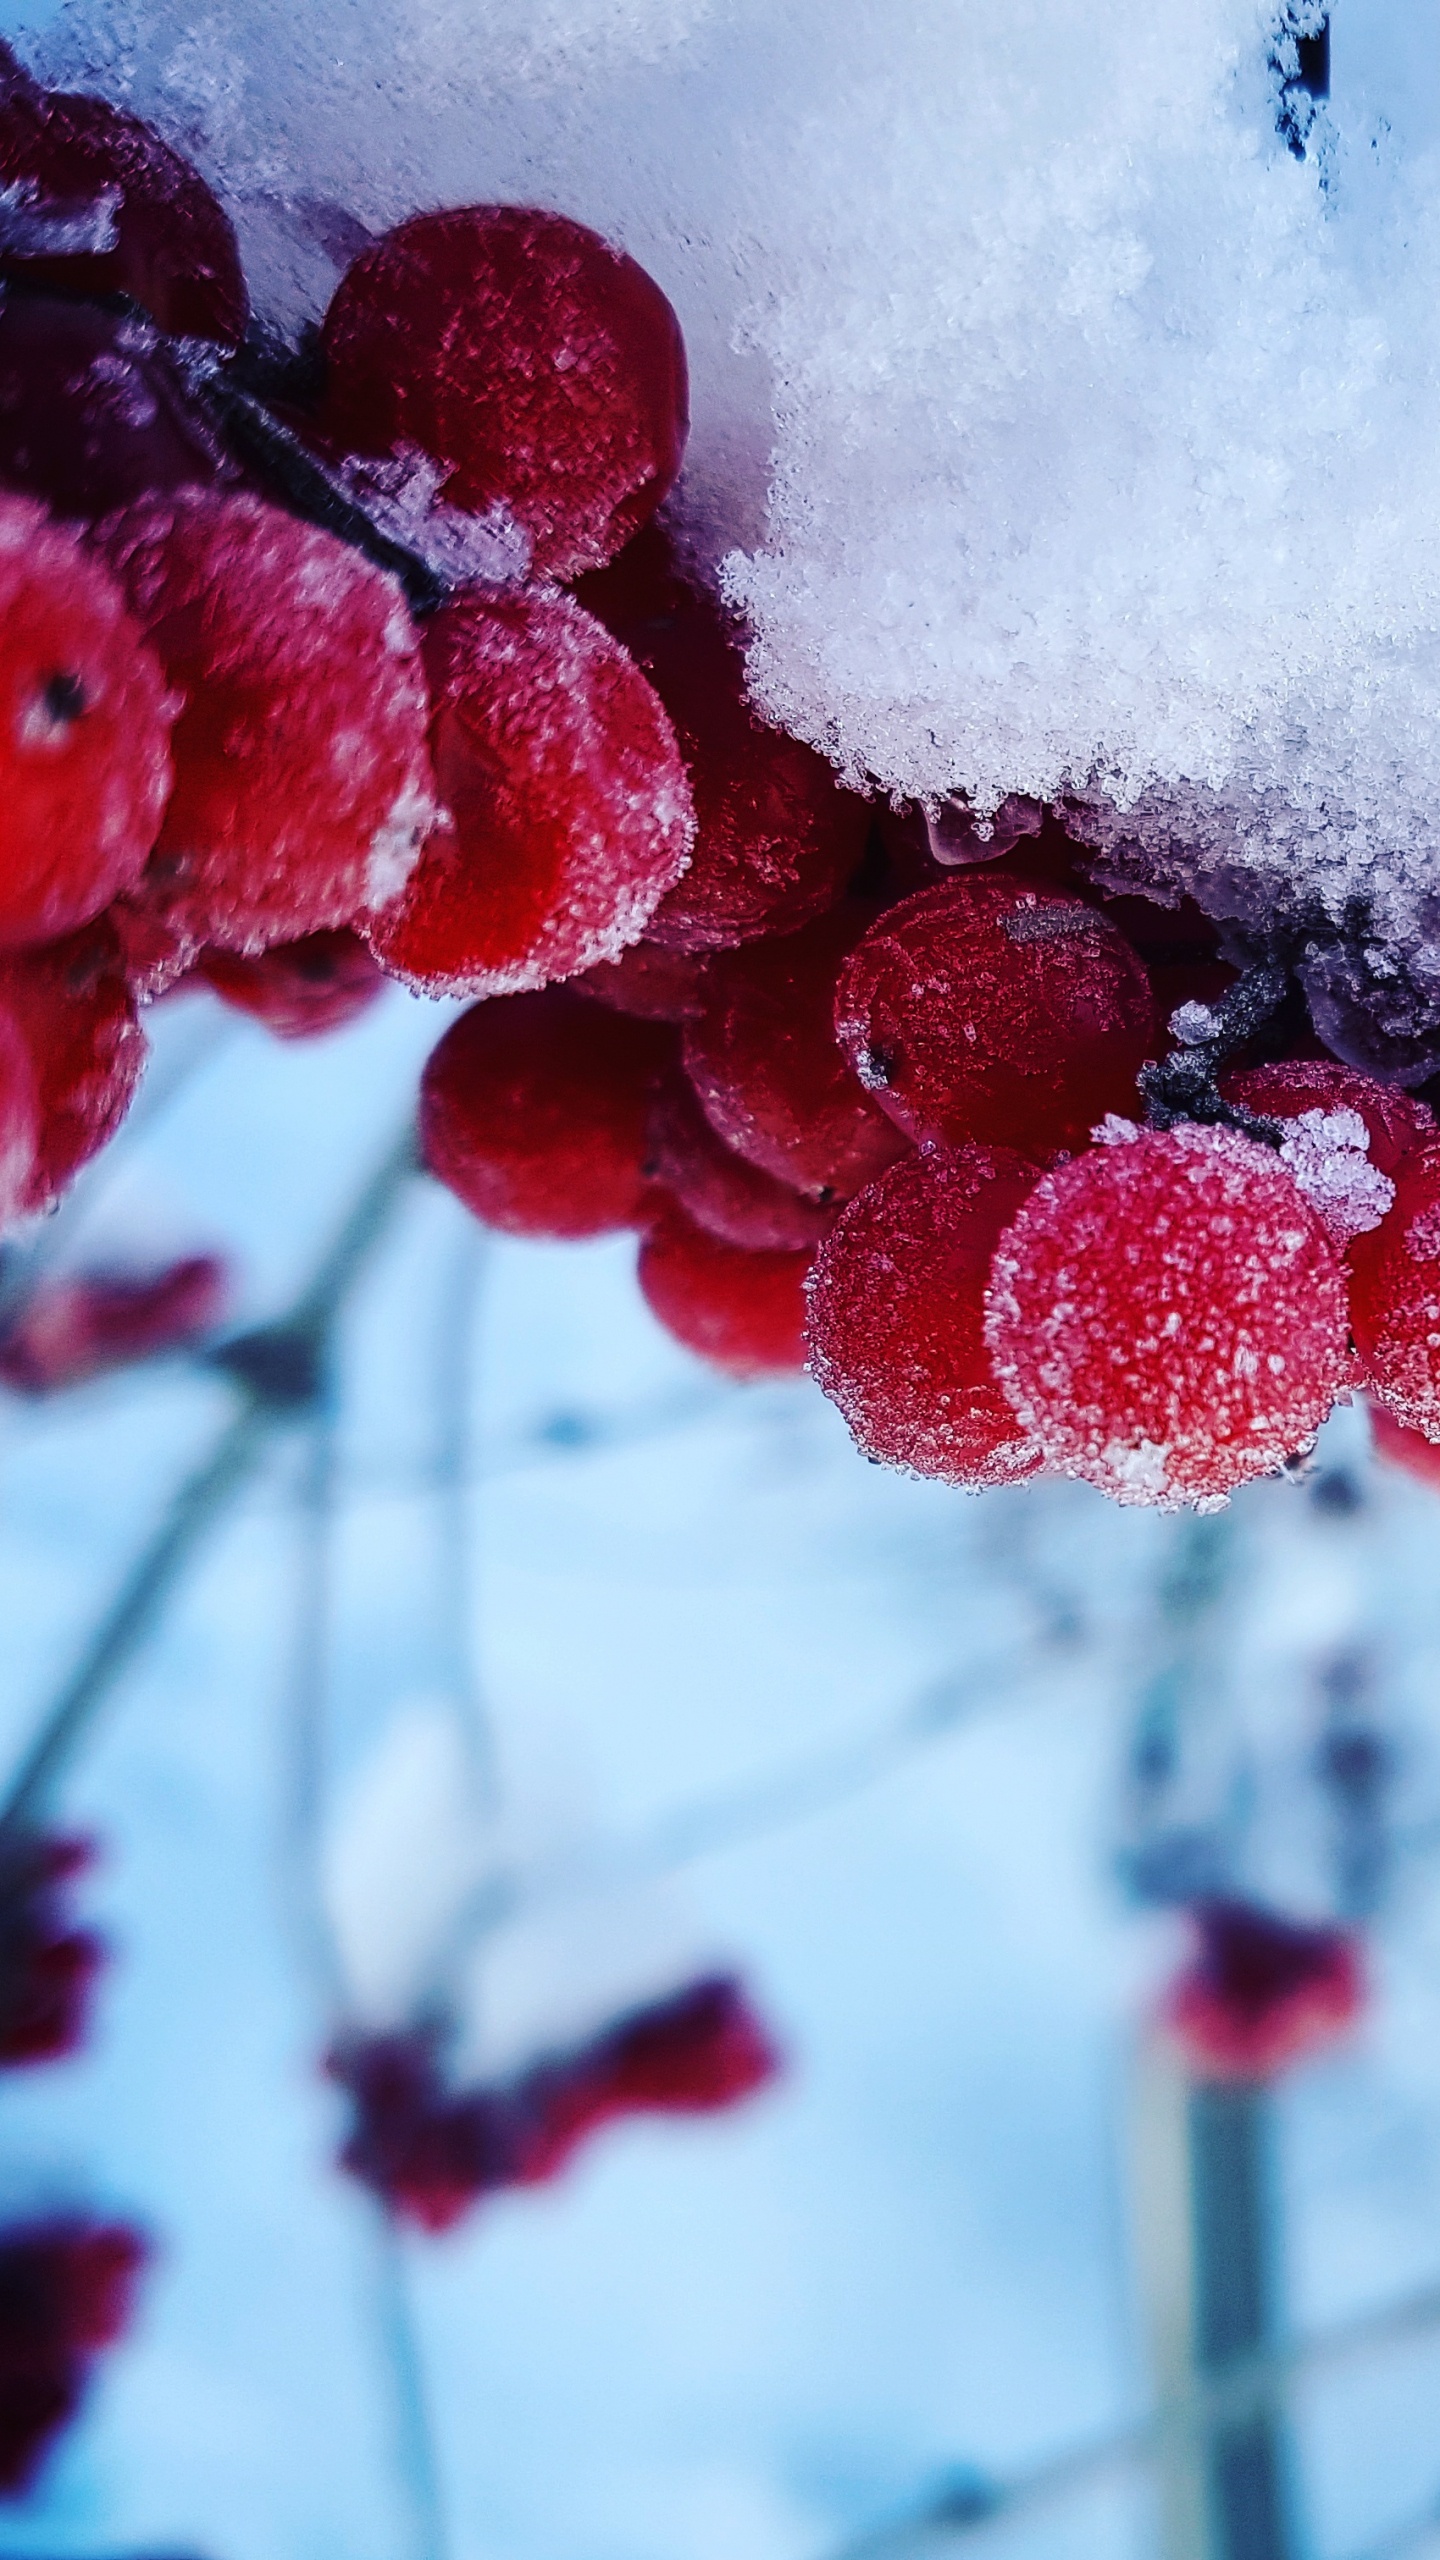 Red Round Fruits Covered With Snow. Wallpaper in 1440x2560 Resolution